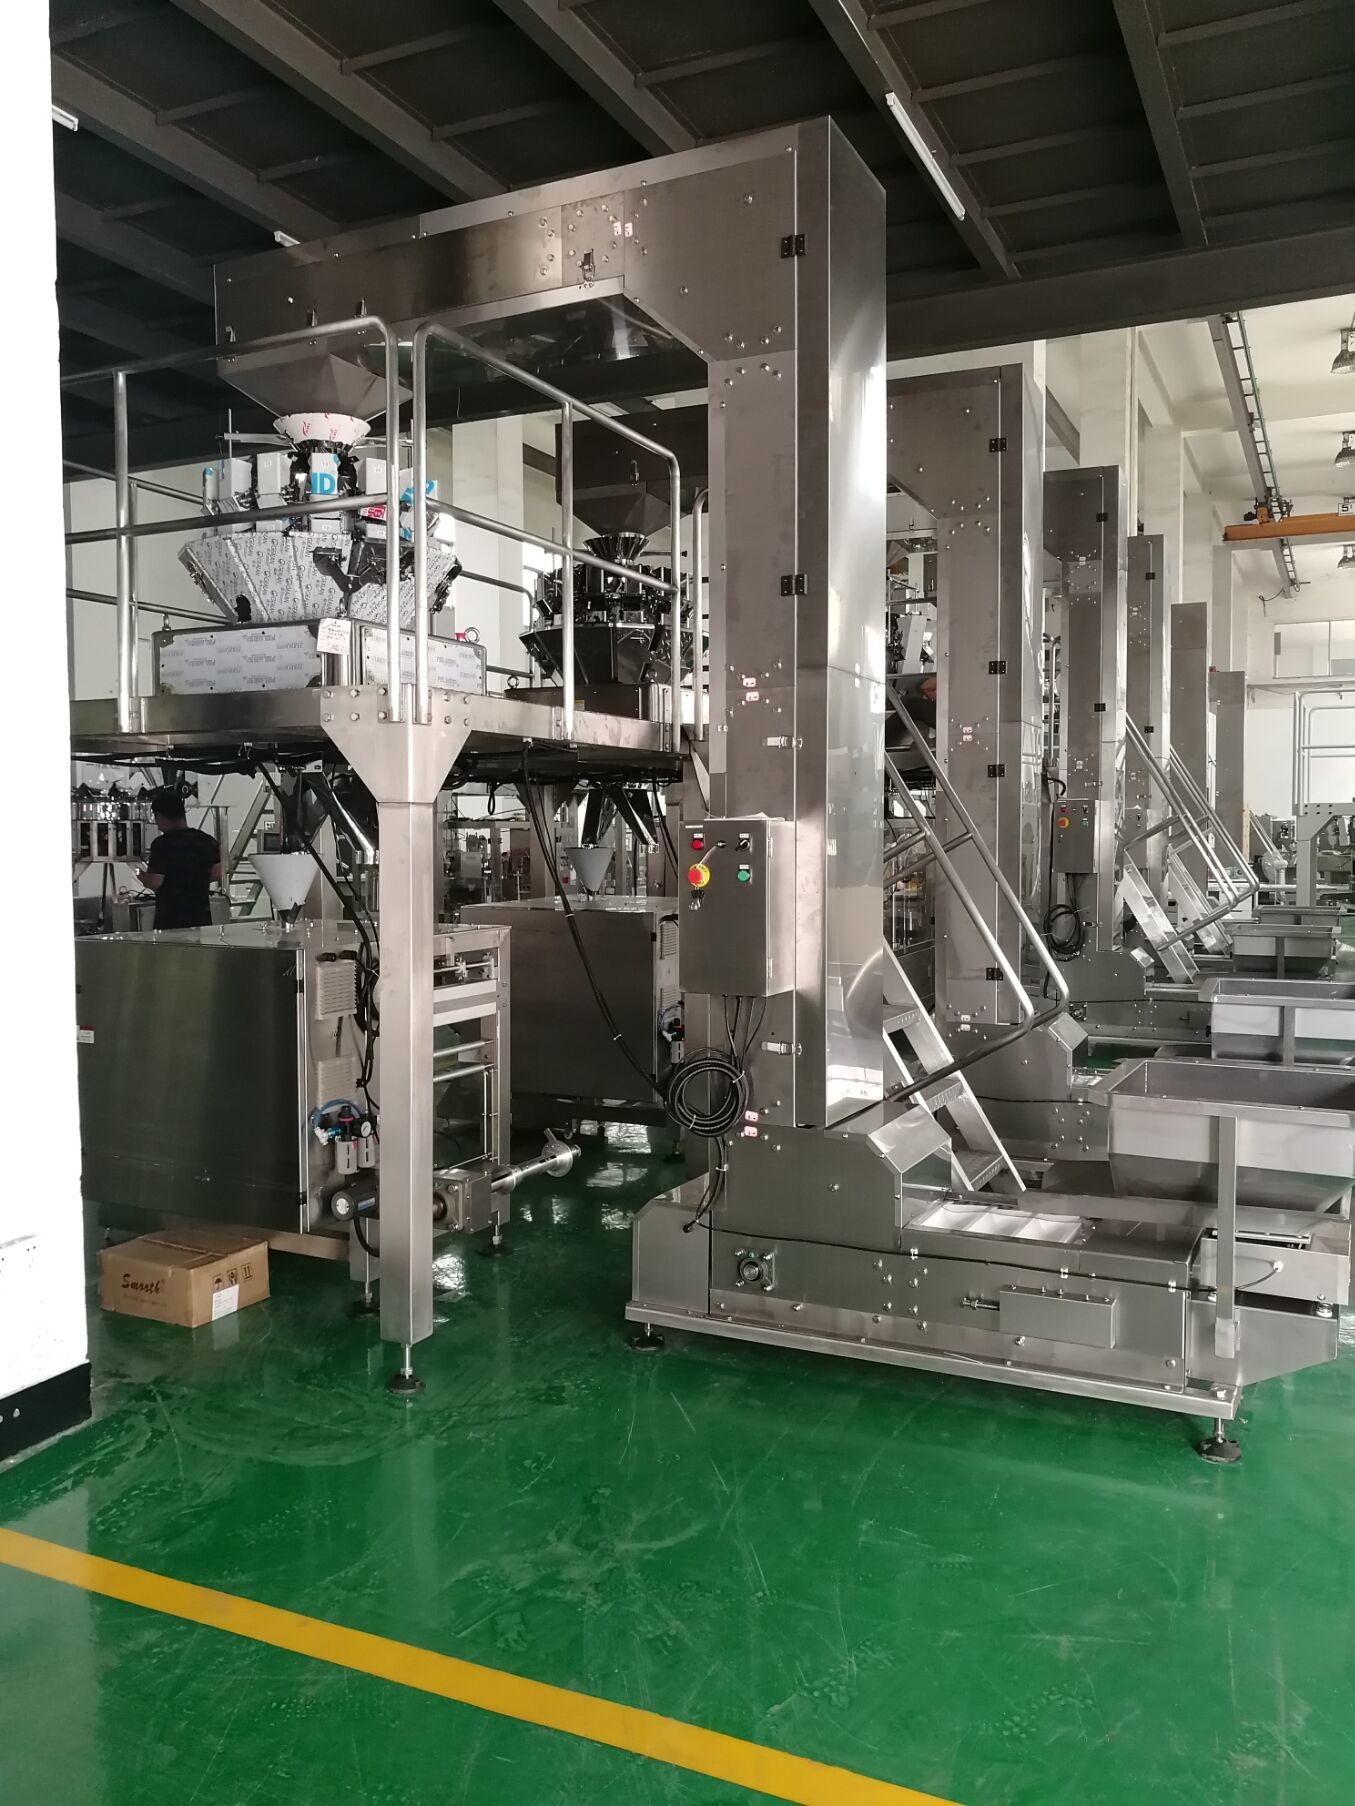 Pillow Type 5000g Automatic Bagging And Weighing Machine